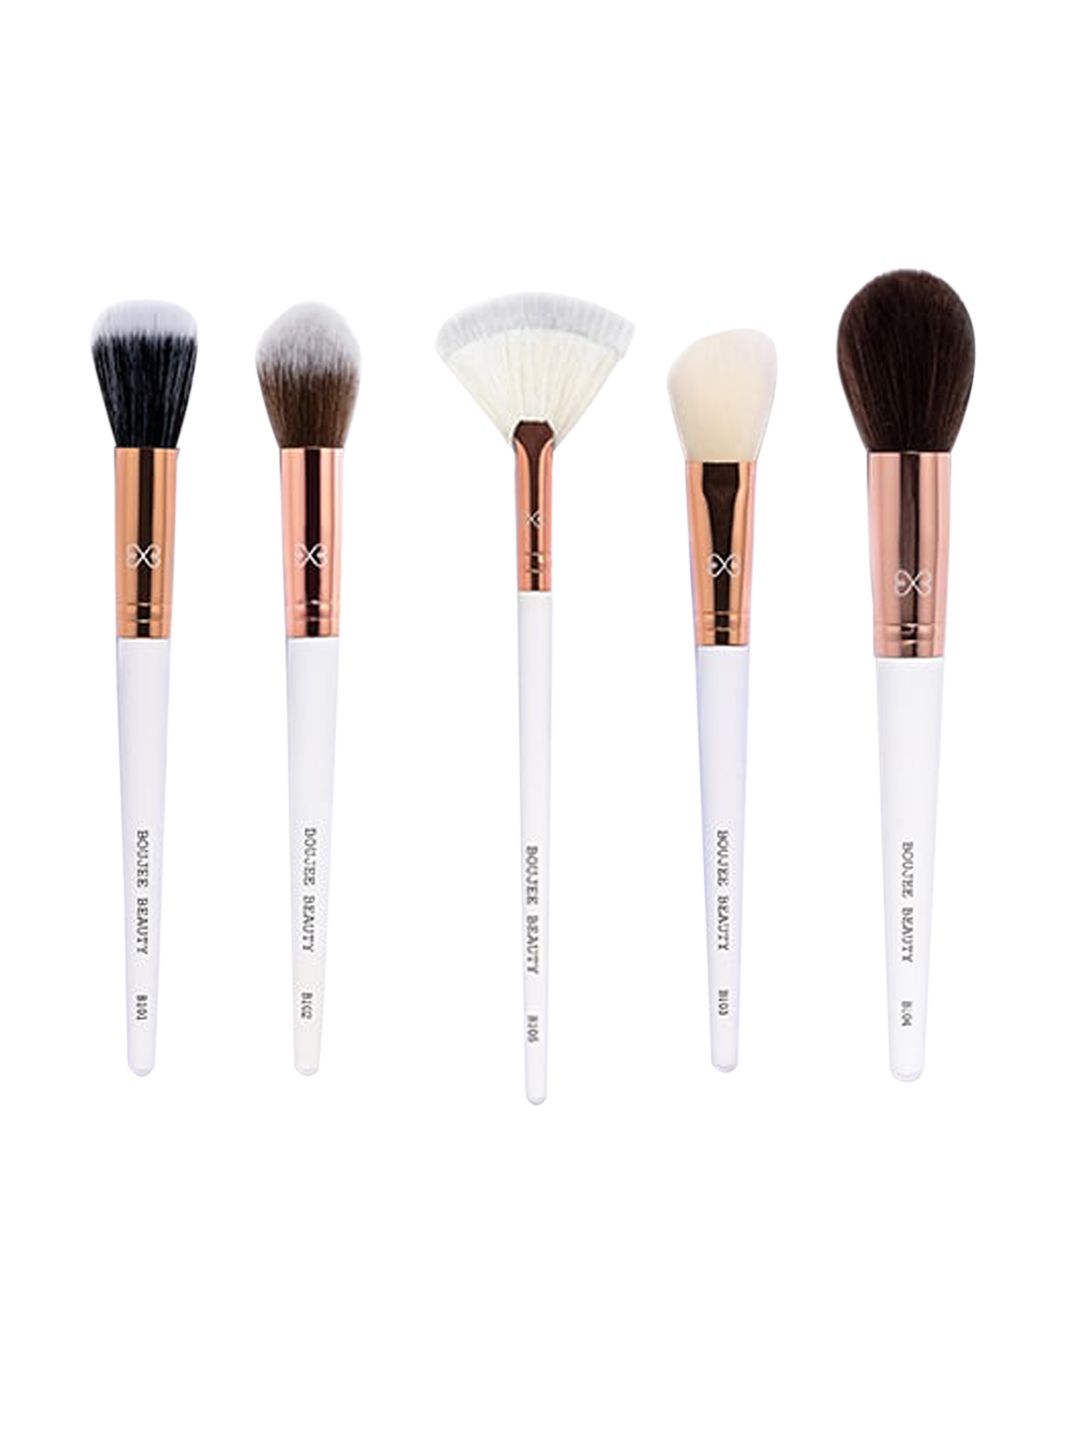 BOUJEE BEAUTY Set Of 5 Face Brushes Price in India